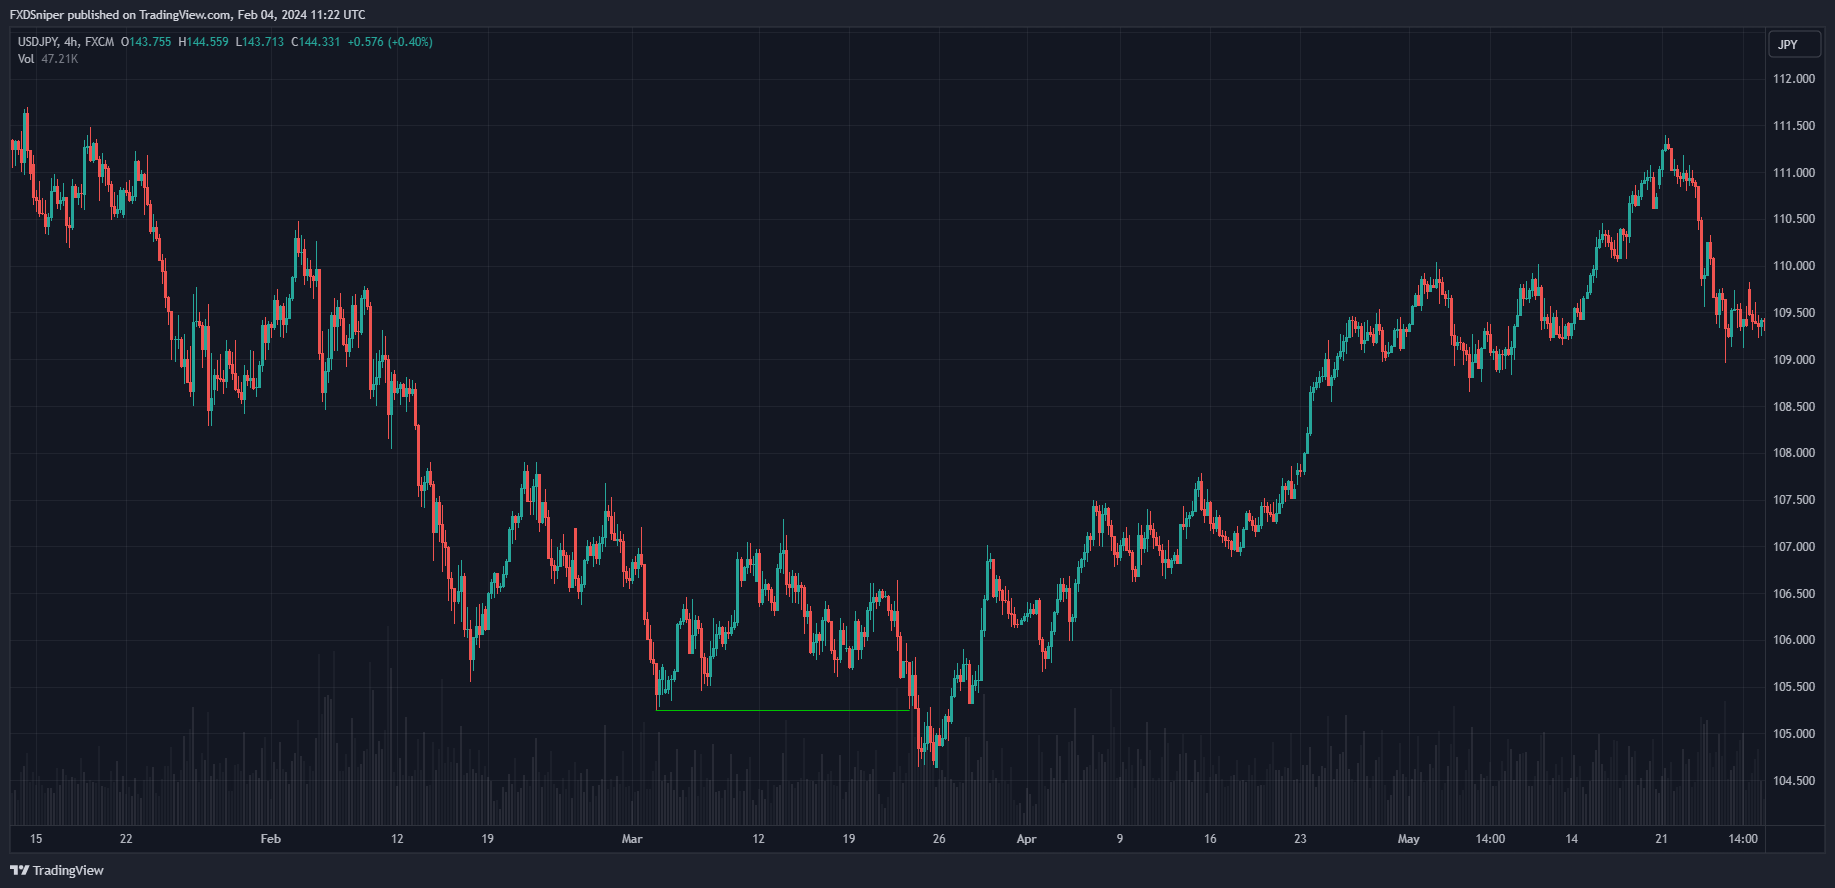 Price broke below the previous low and reversed, why?